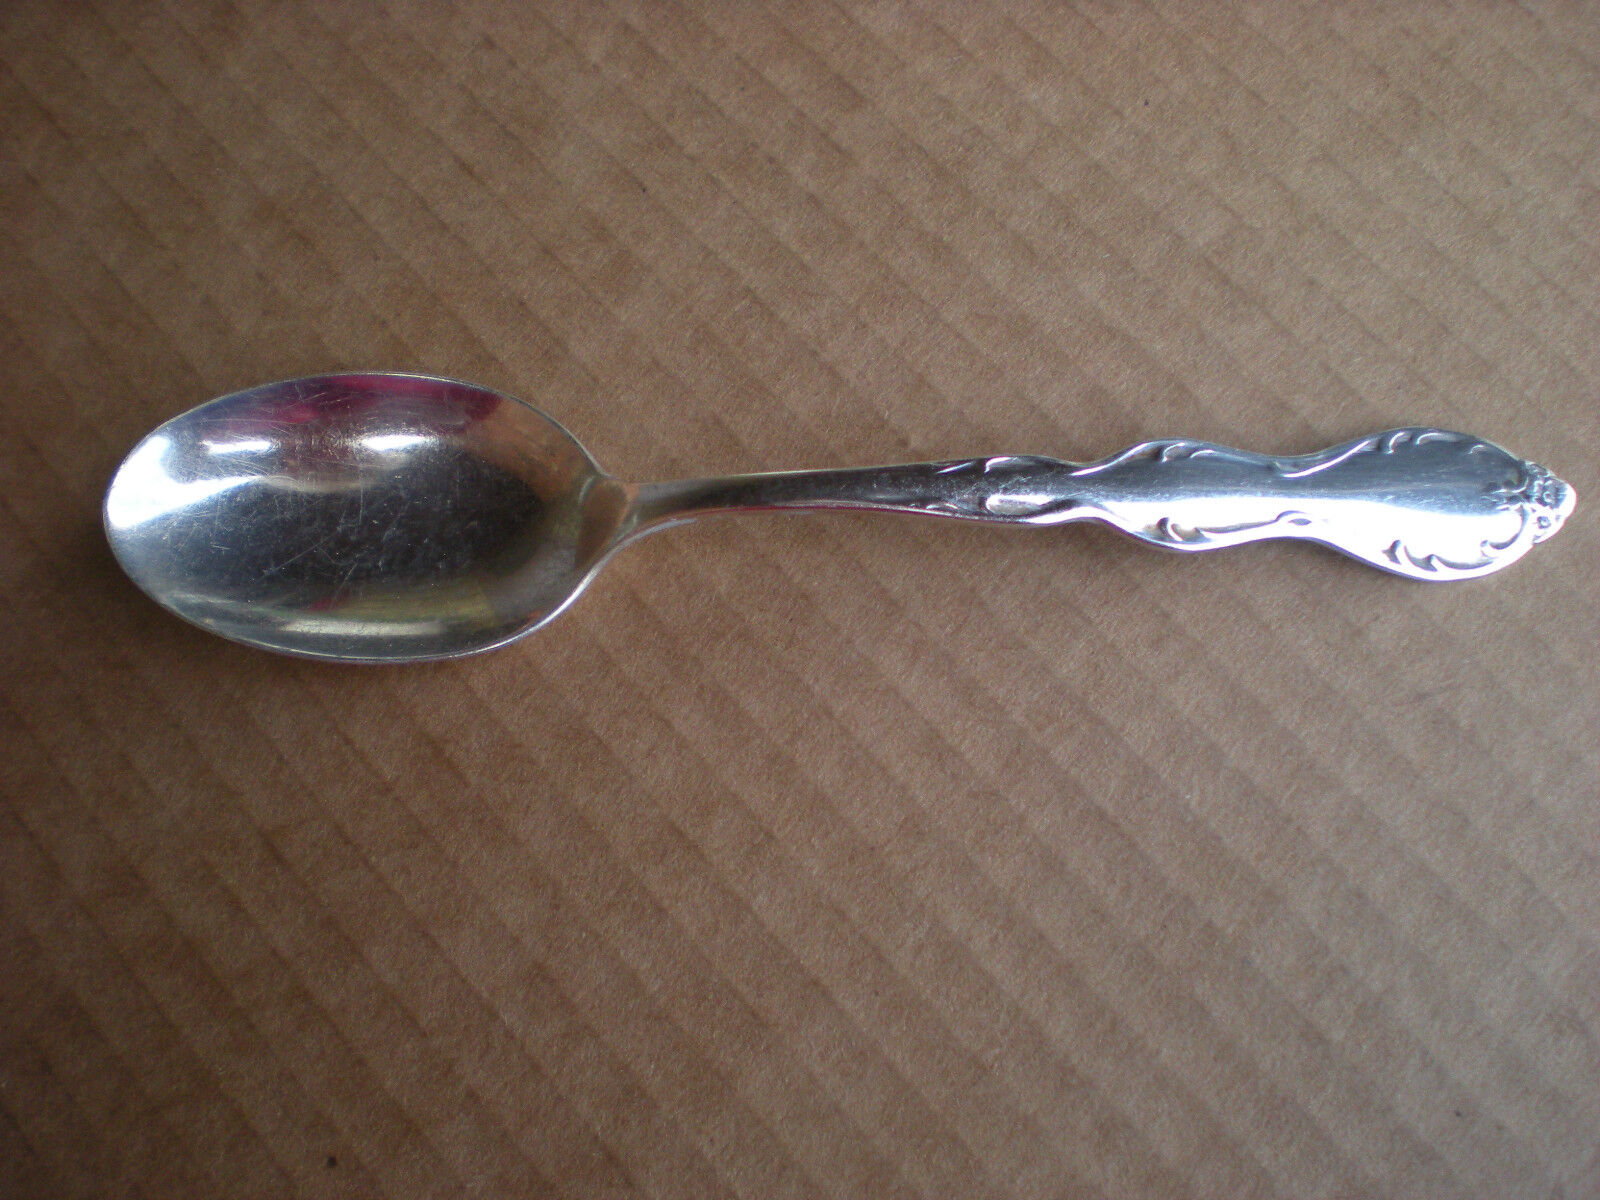 Wm Rogers CAMELOT MELODY Silverplate Spoon ExtraPlate Original Rogers1964 